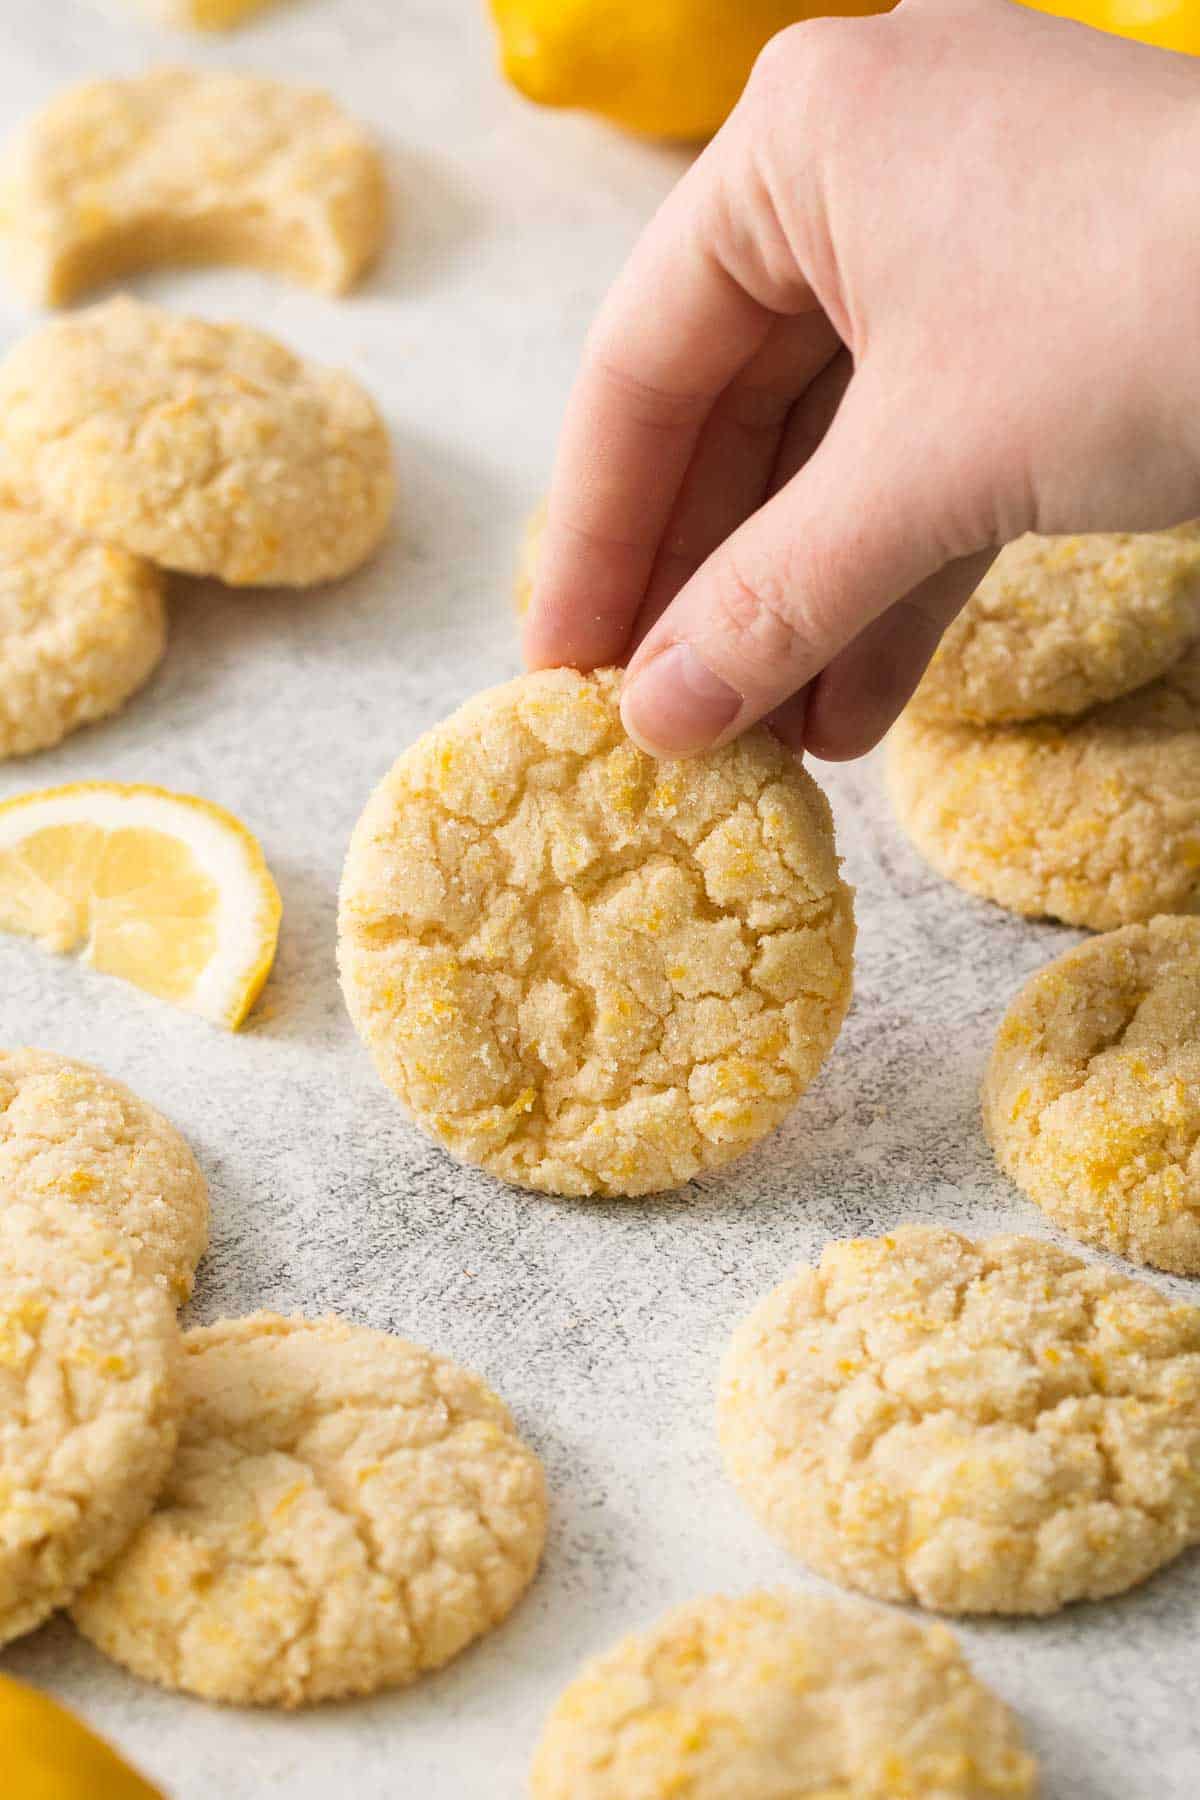 Lemon cookies on parchment paper with a wedge of lemon and a hand picking up a cookie